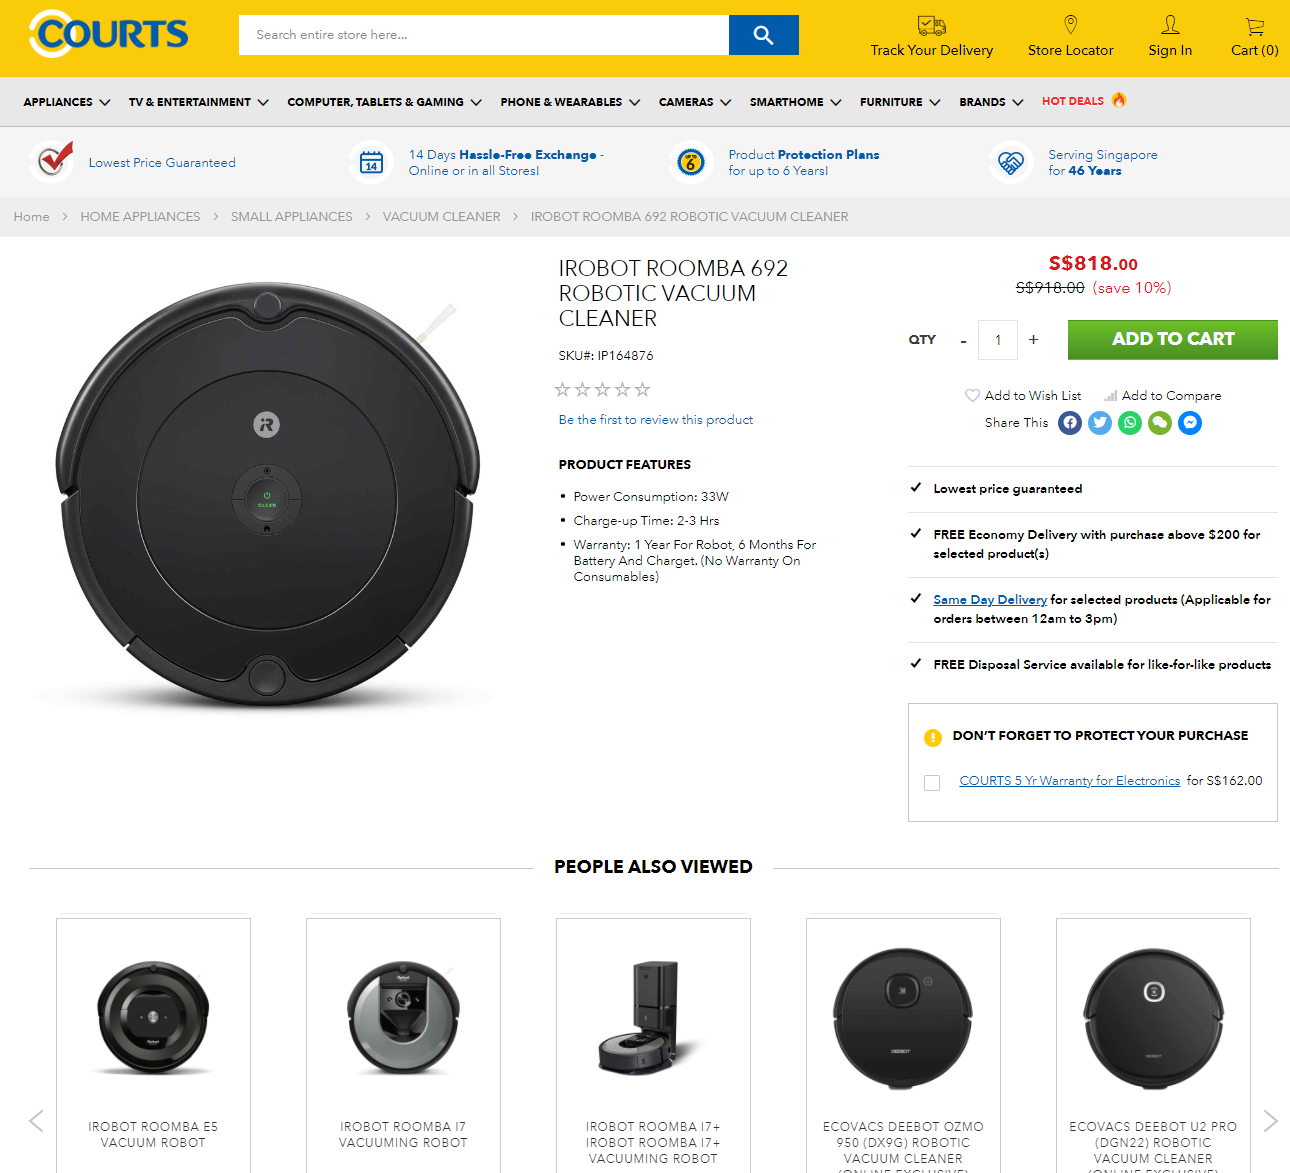 Free iRobot Roomba 692 (worth S$818) and Free Entertainer Access